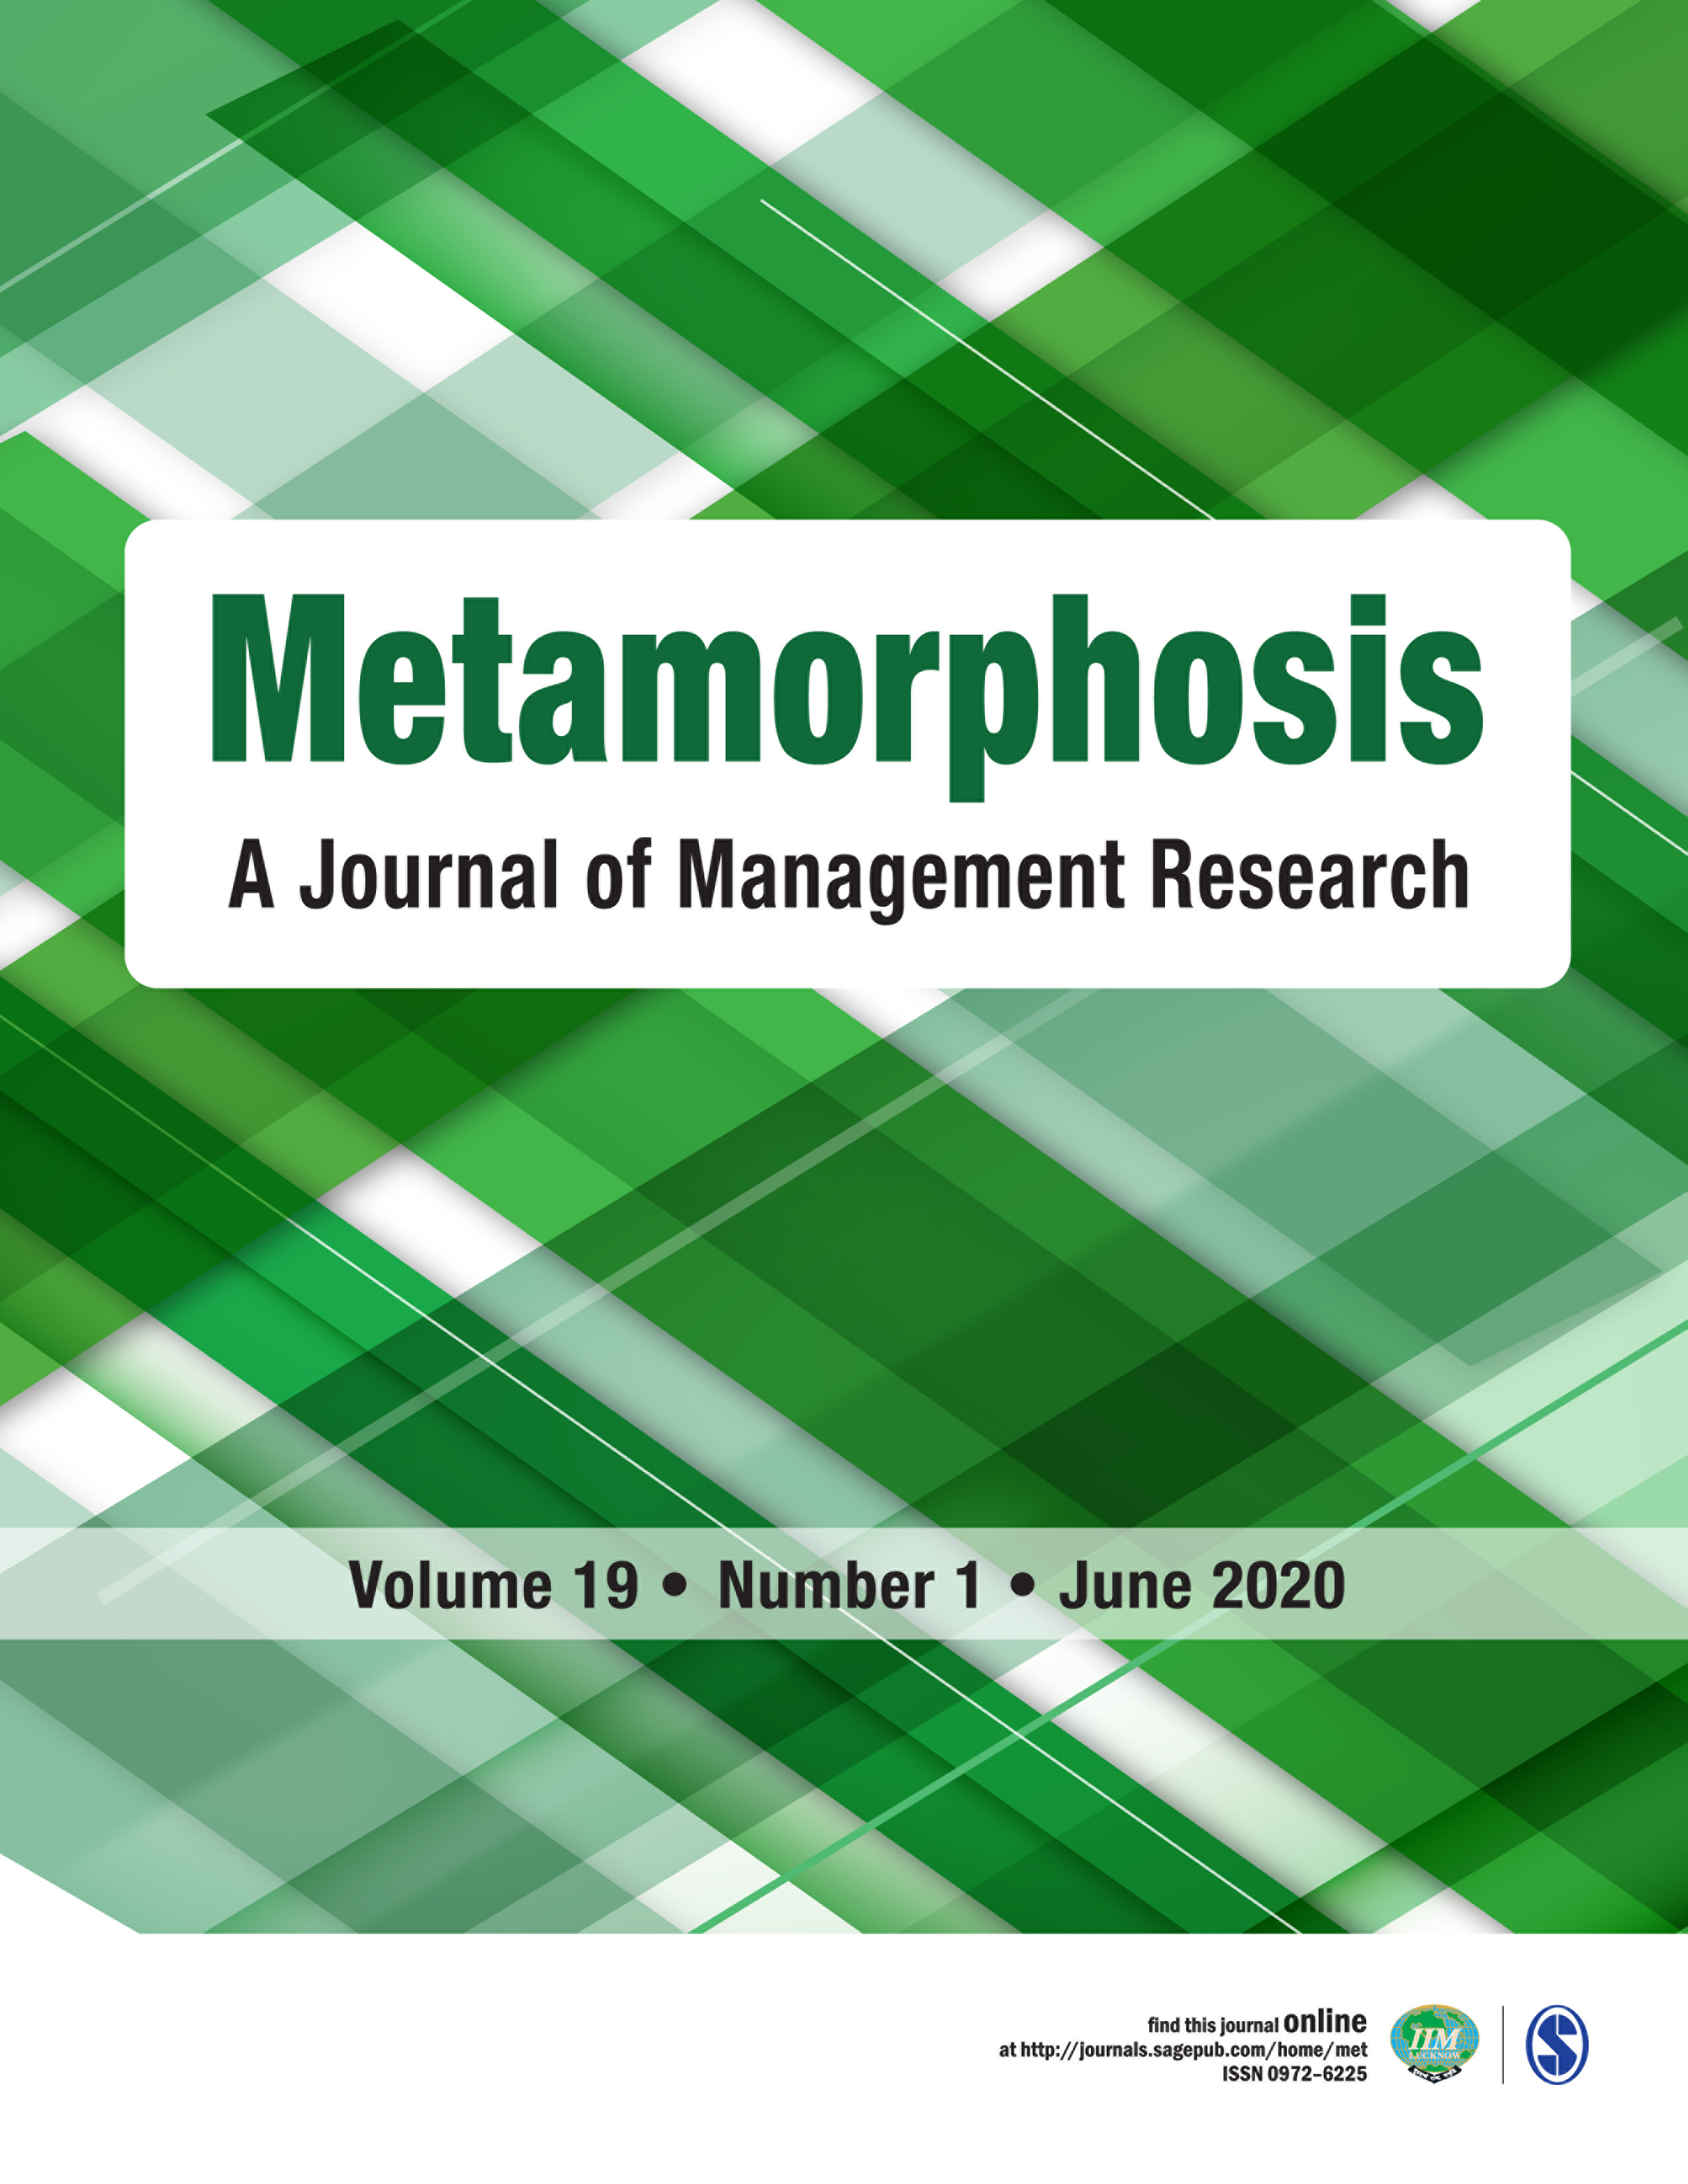 Metamorphosis: A Journal of Management Research